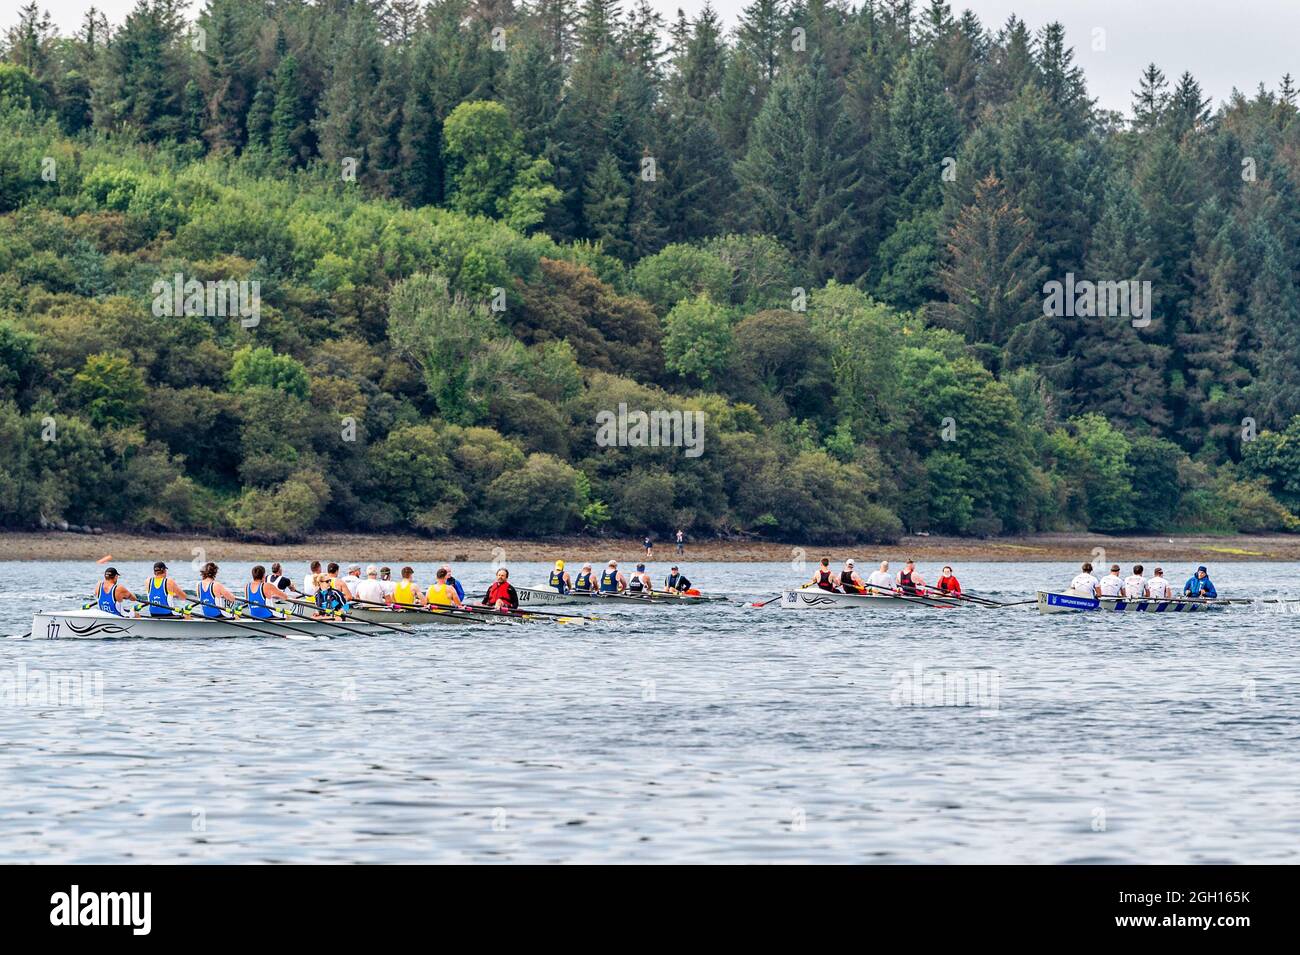 Bantry, West Cork, Ireland. 4th Sep, 2021. Rowing Ireland is holding the national offshore rowing championships in Bantry this weekend. The event, hosted by Bantry Rowing Club, is being contested by 30 rowing clubs from around Ireland. The racing was very close. Credit: AG News/Alamy Live News Stock Photo